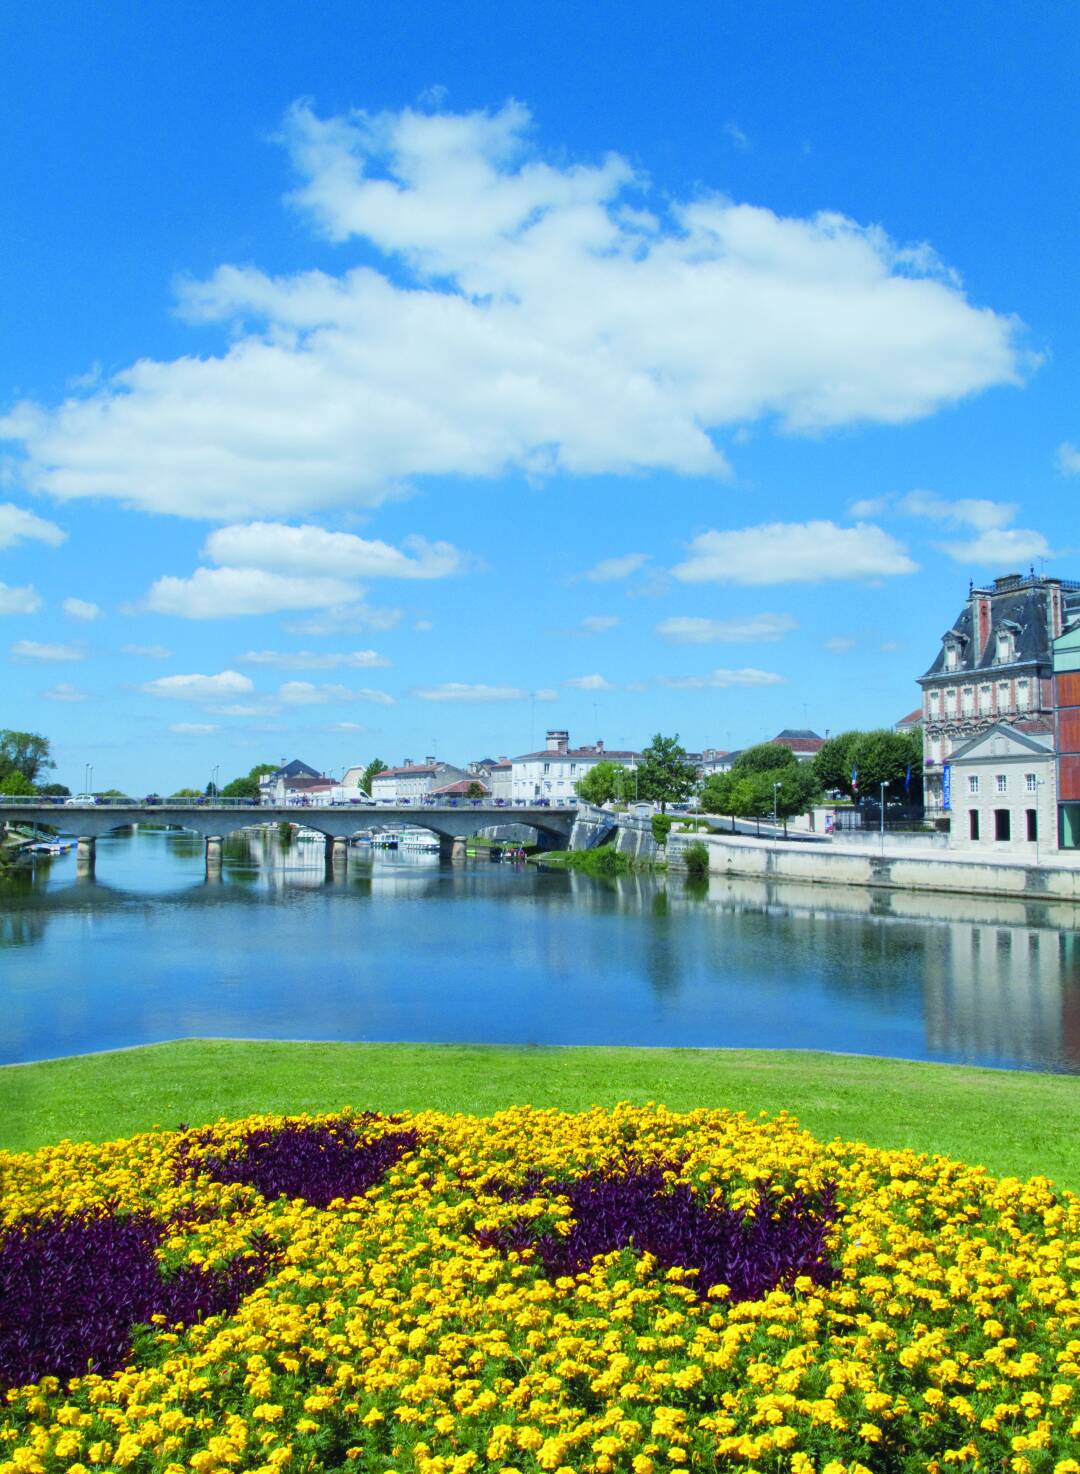 The town of Jarnac: Jarnac is the birthplace of the former president Fran&ccedil;ois Mitterrand, you can discover his birthplace or visit the Courvoisier Museum dedicated to the history and production of cognac